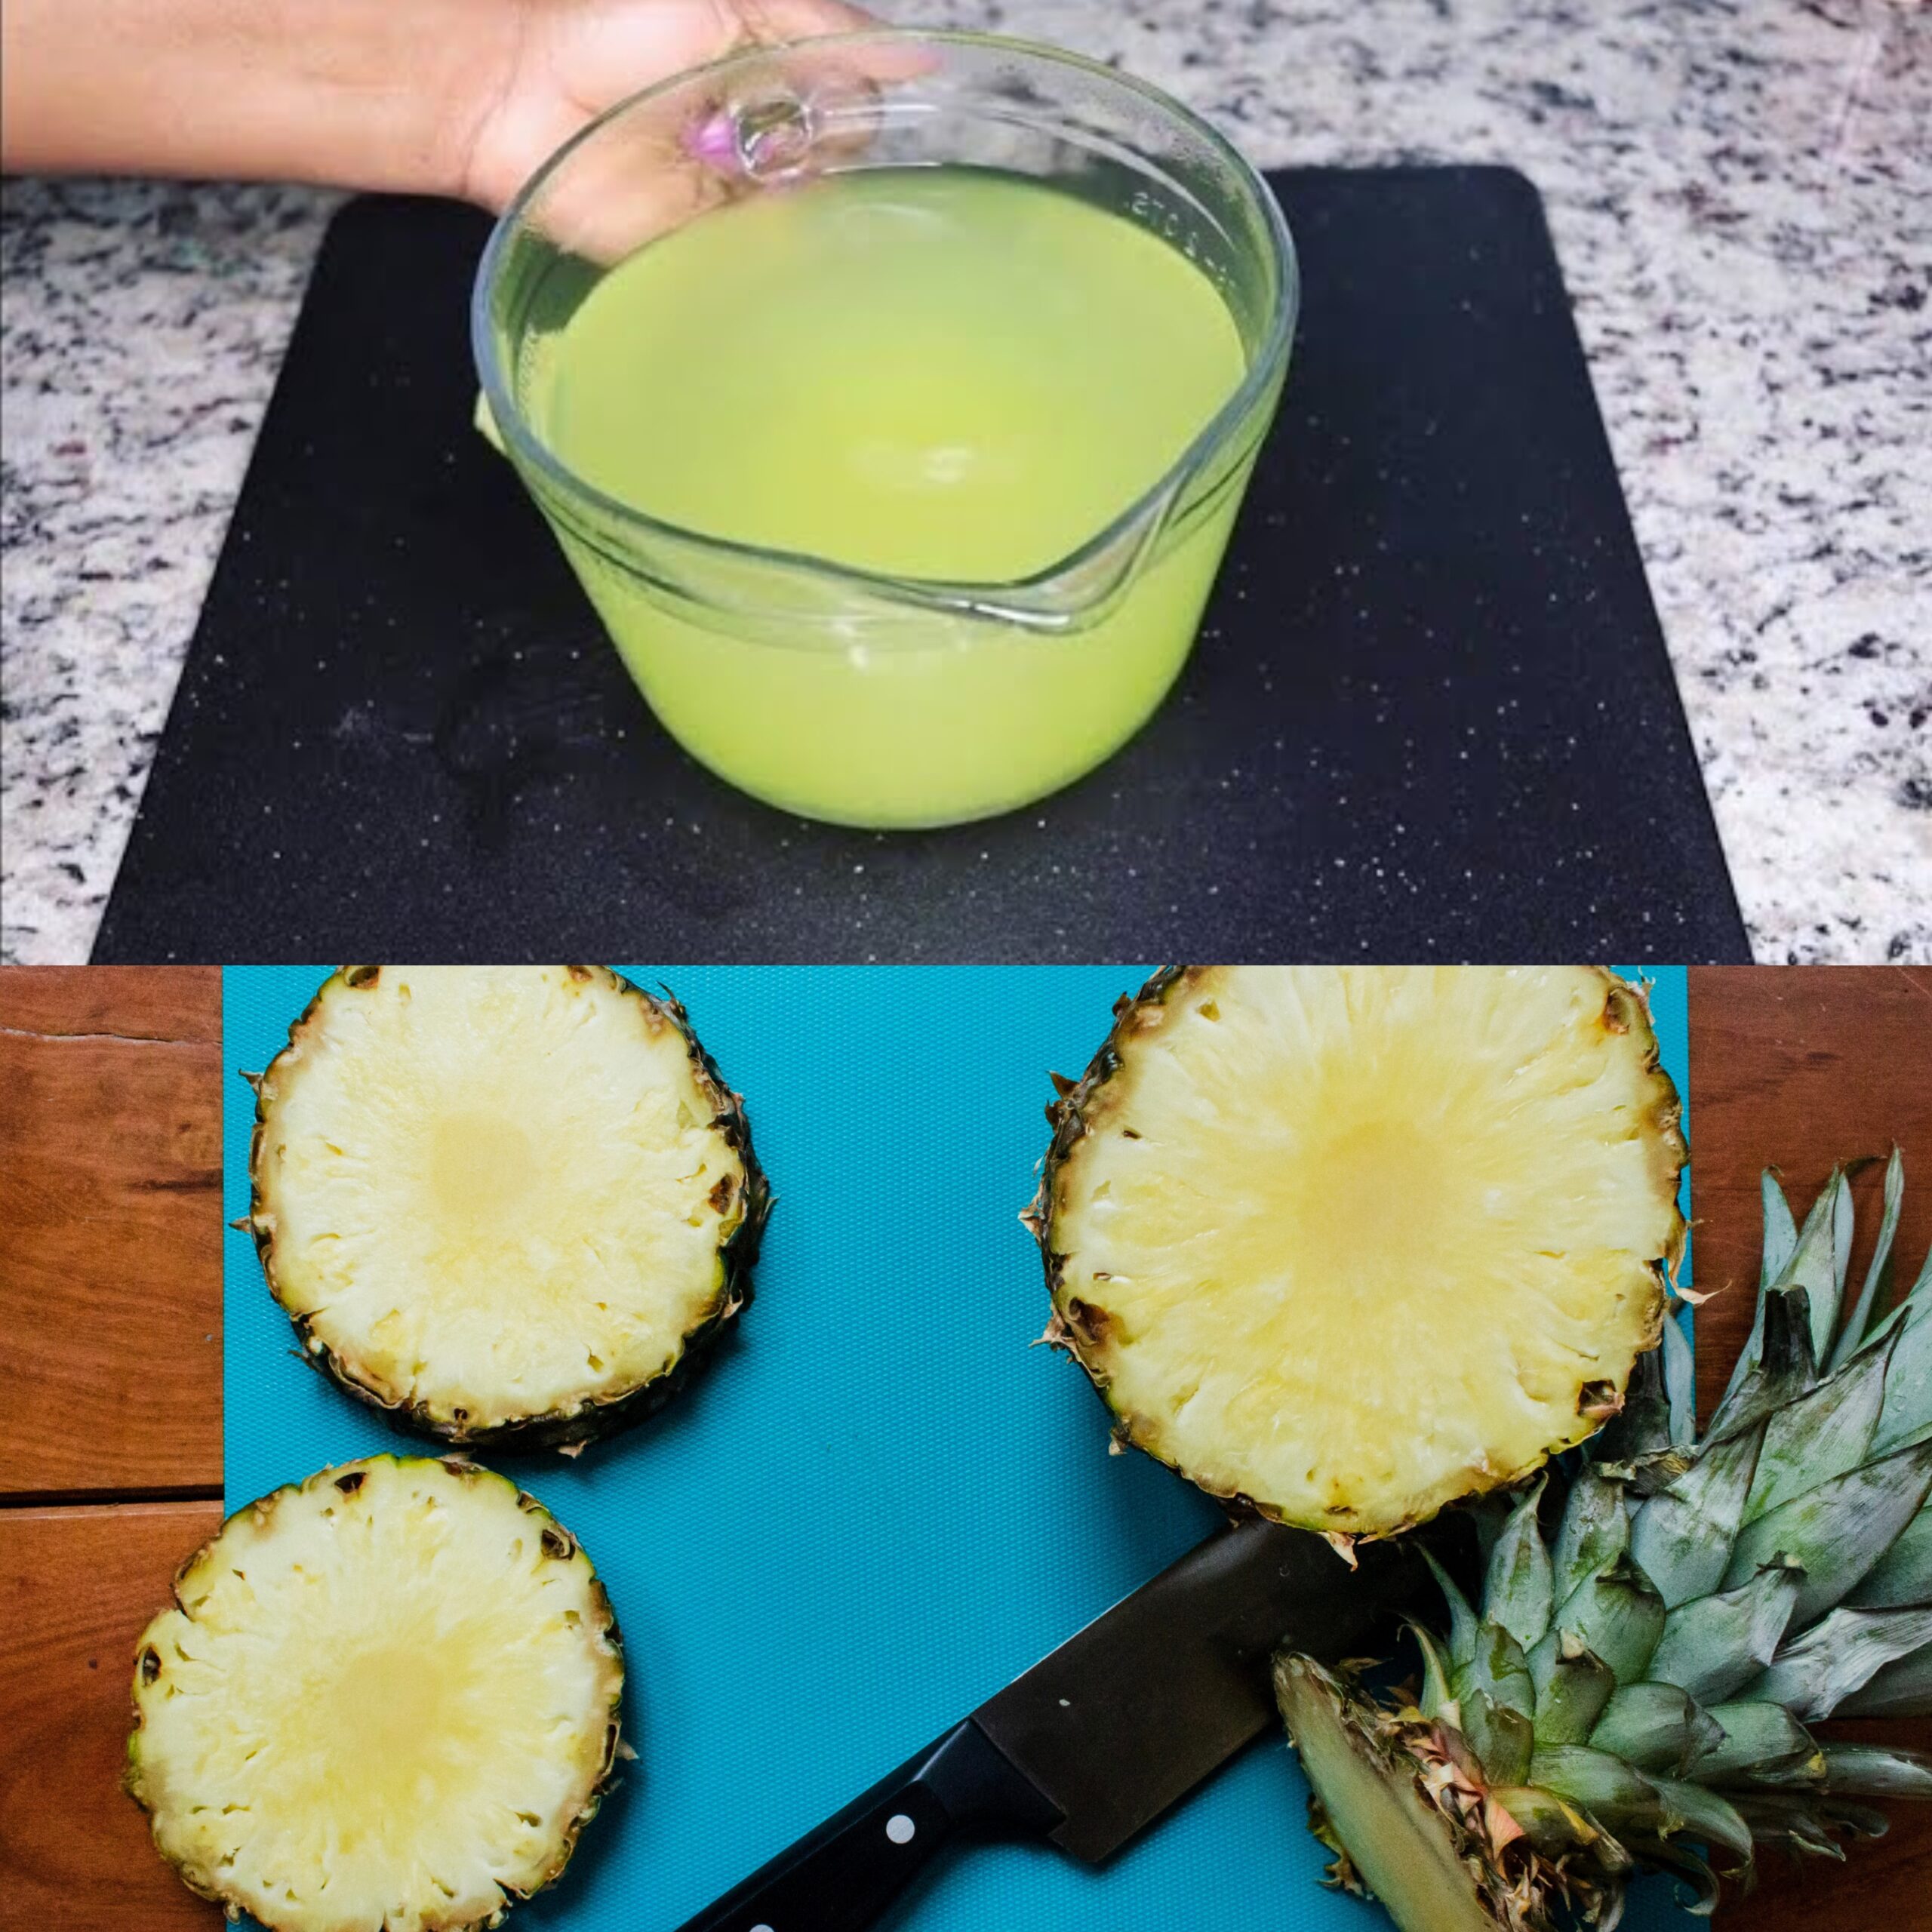 Energise Your Day with Pineapple, Lemon, and Ginger Fat-Burning Juice! 🍍🍋🧡